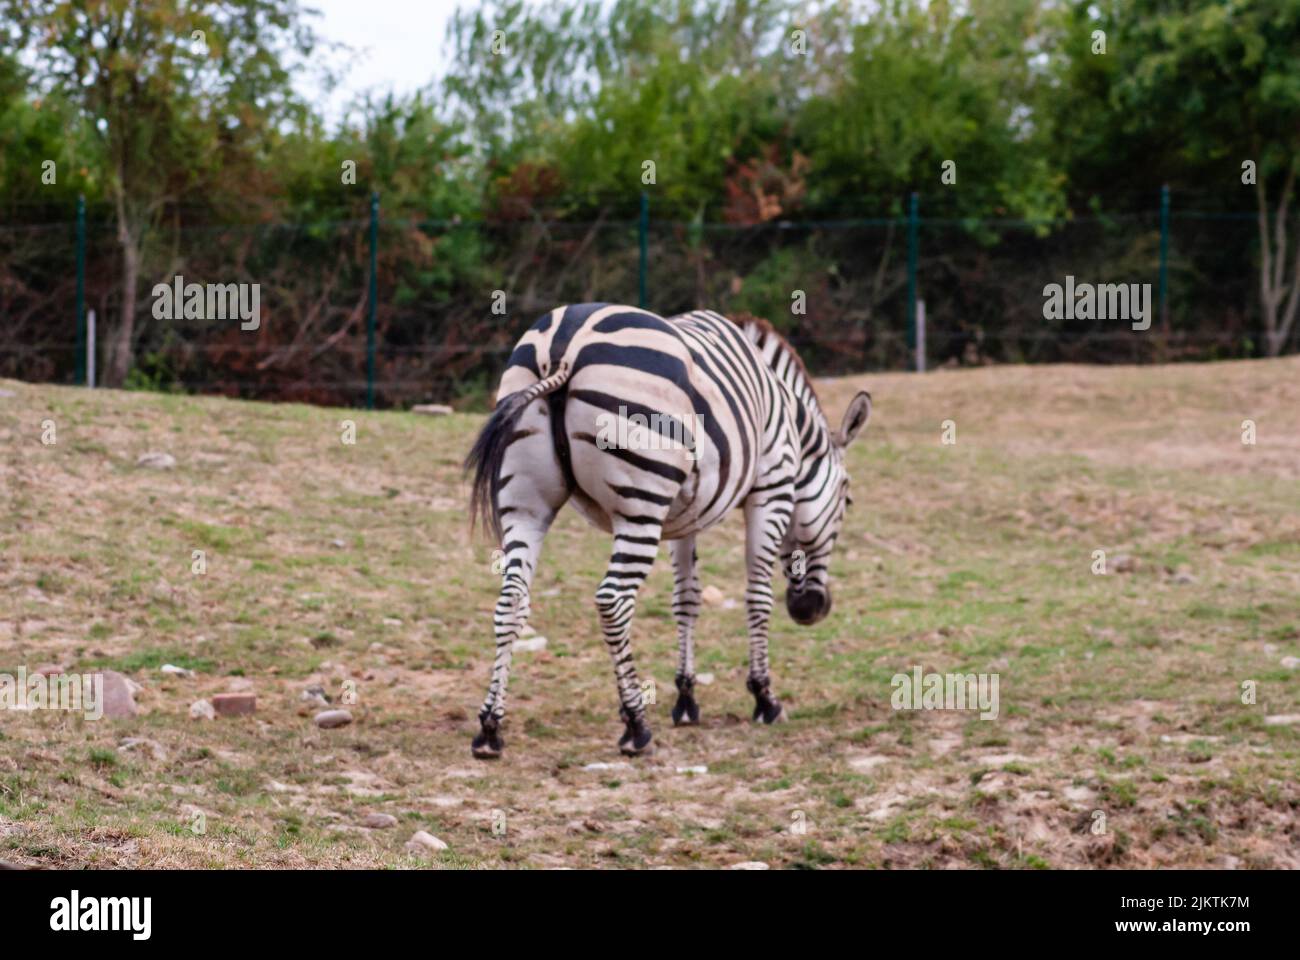 A zebra walking in its enclosure in the zoo Stock Photo